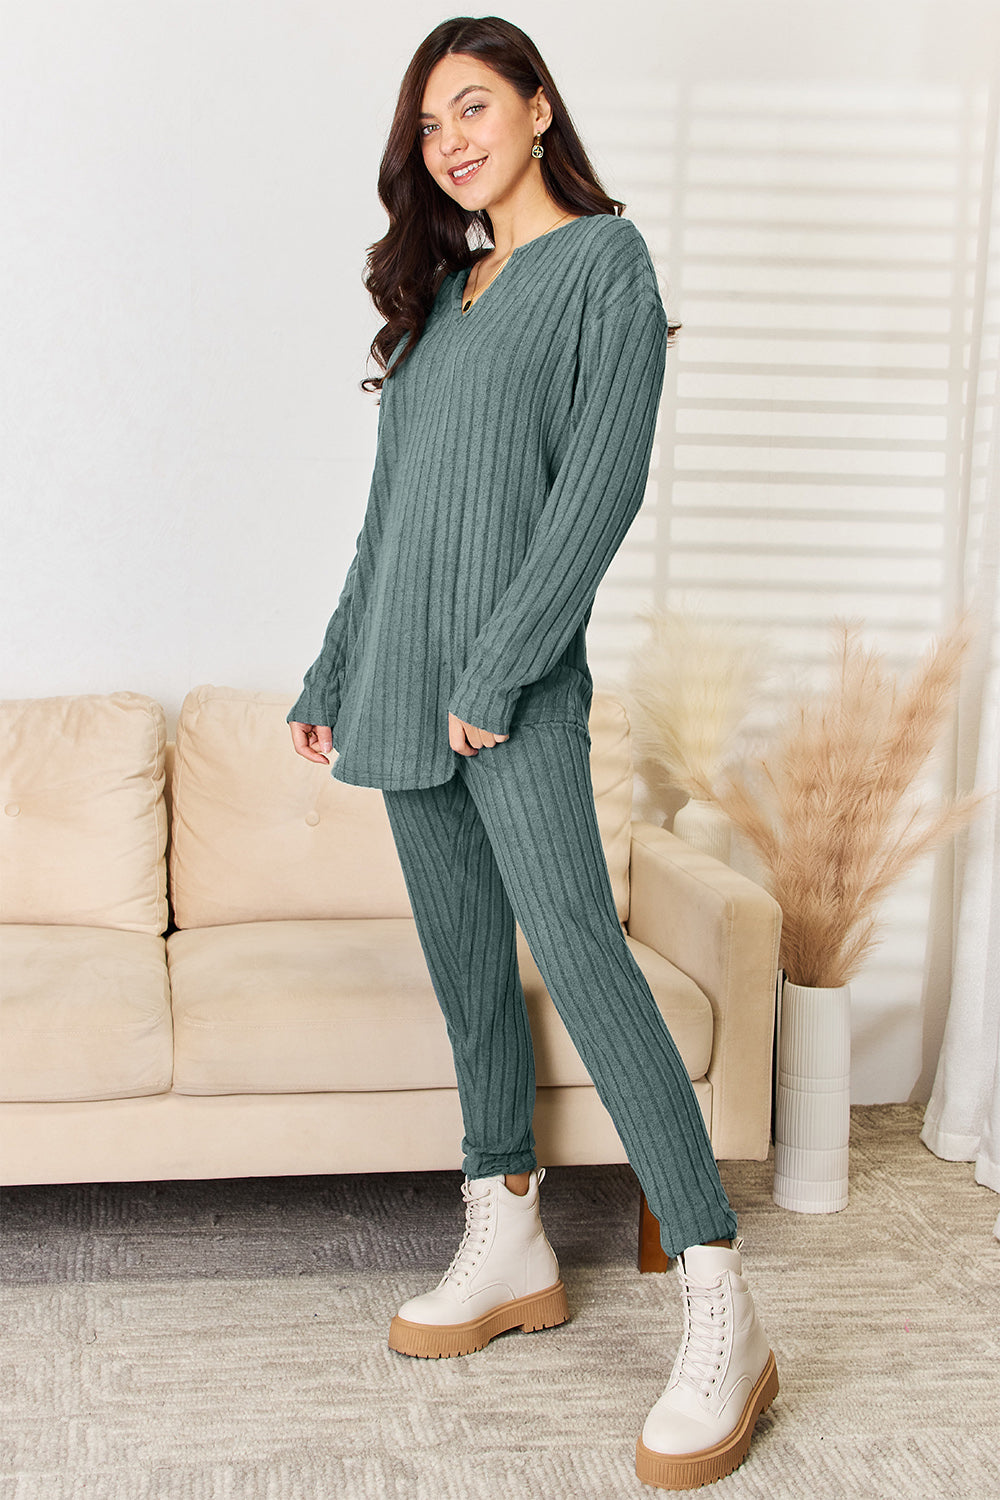 Light Grey Color Long Sleeve Top and Pants Set